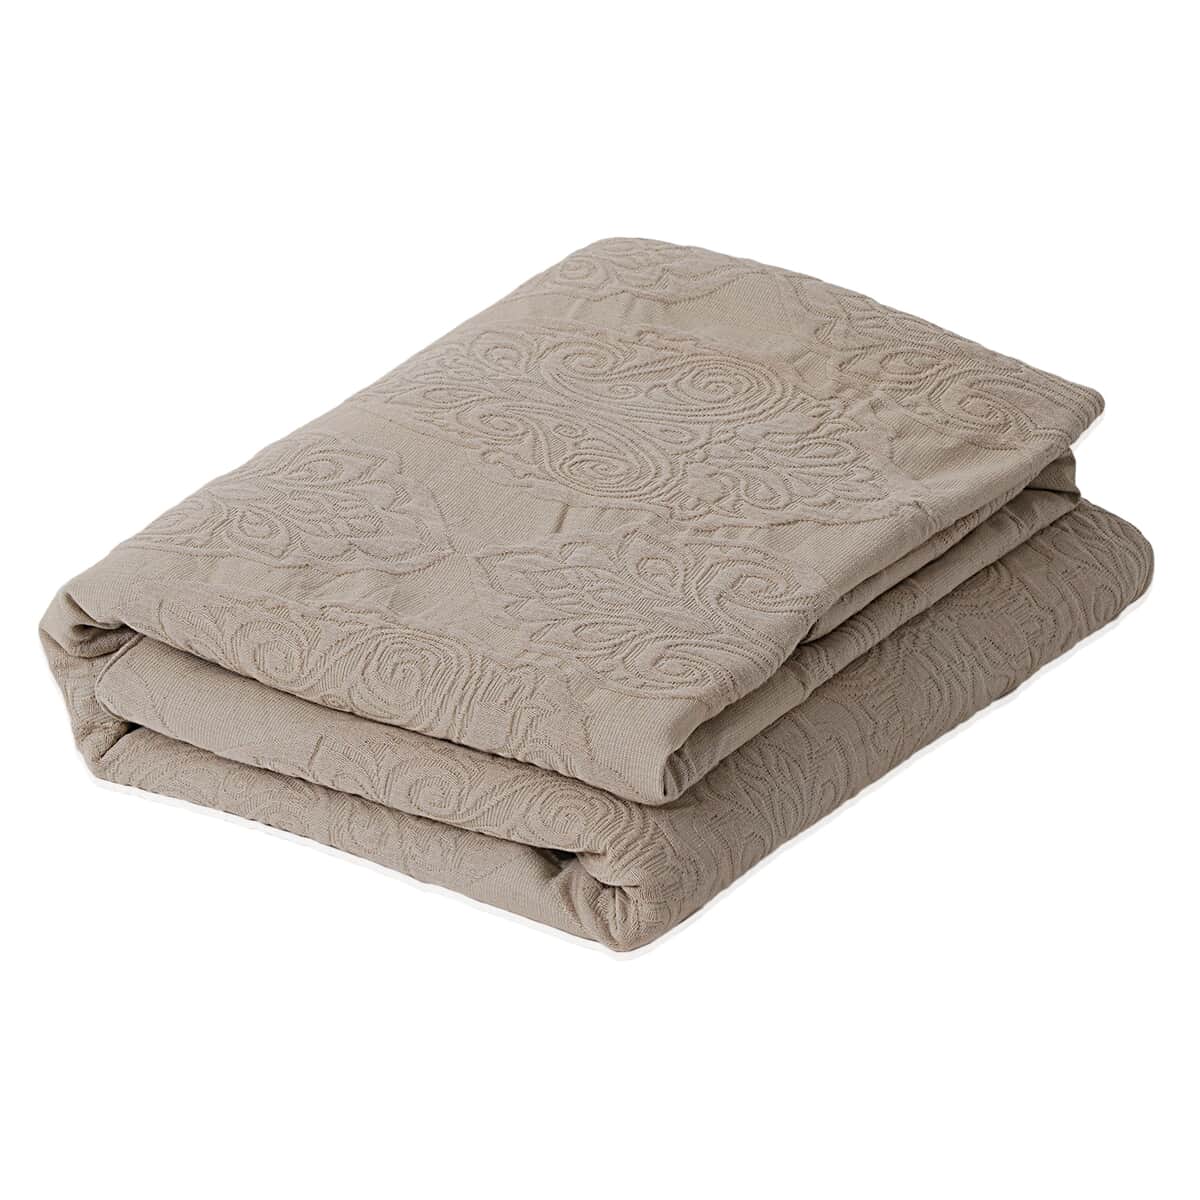 "Matelassé  Quilted  Bedspread Set with 2 Pillowcases - 100% Cotton Queen 350 gsm" image number 4